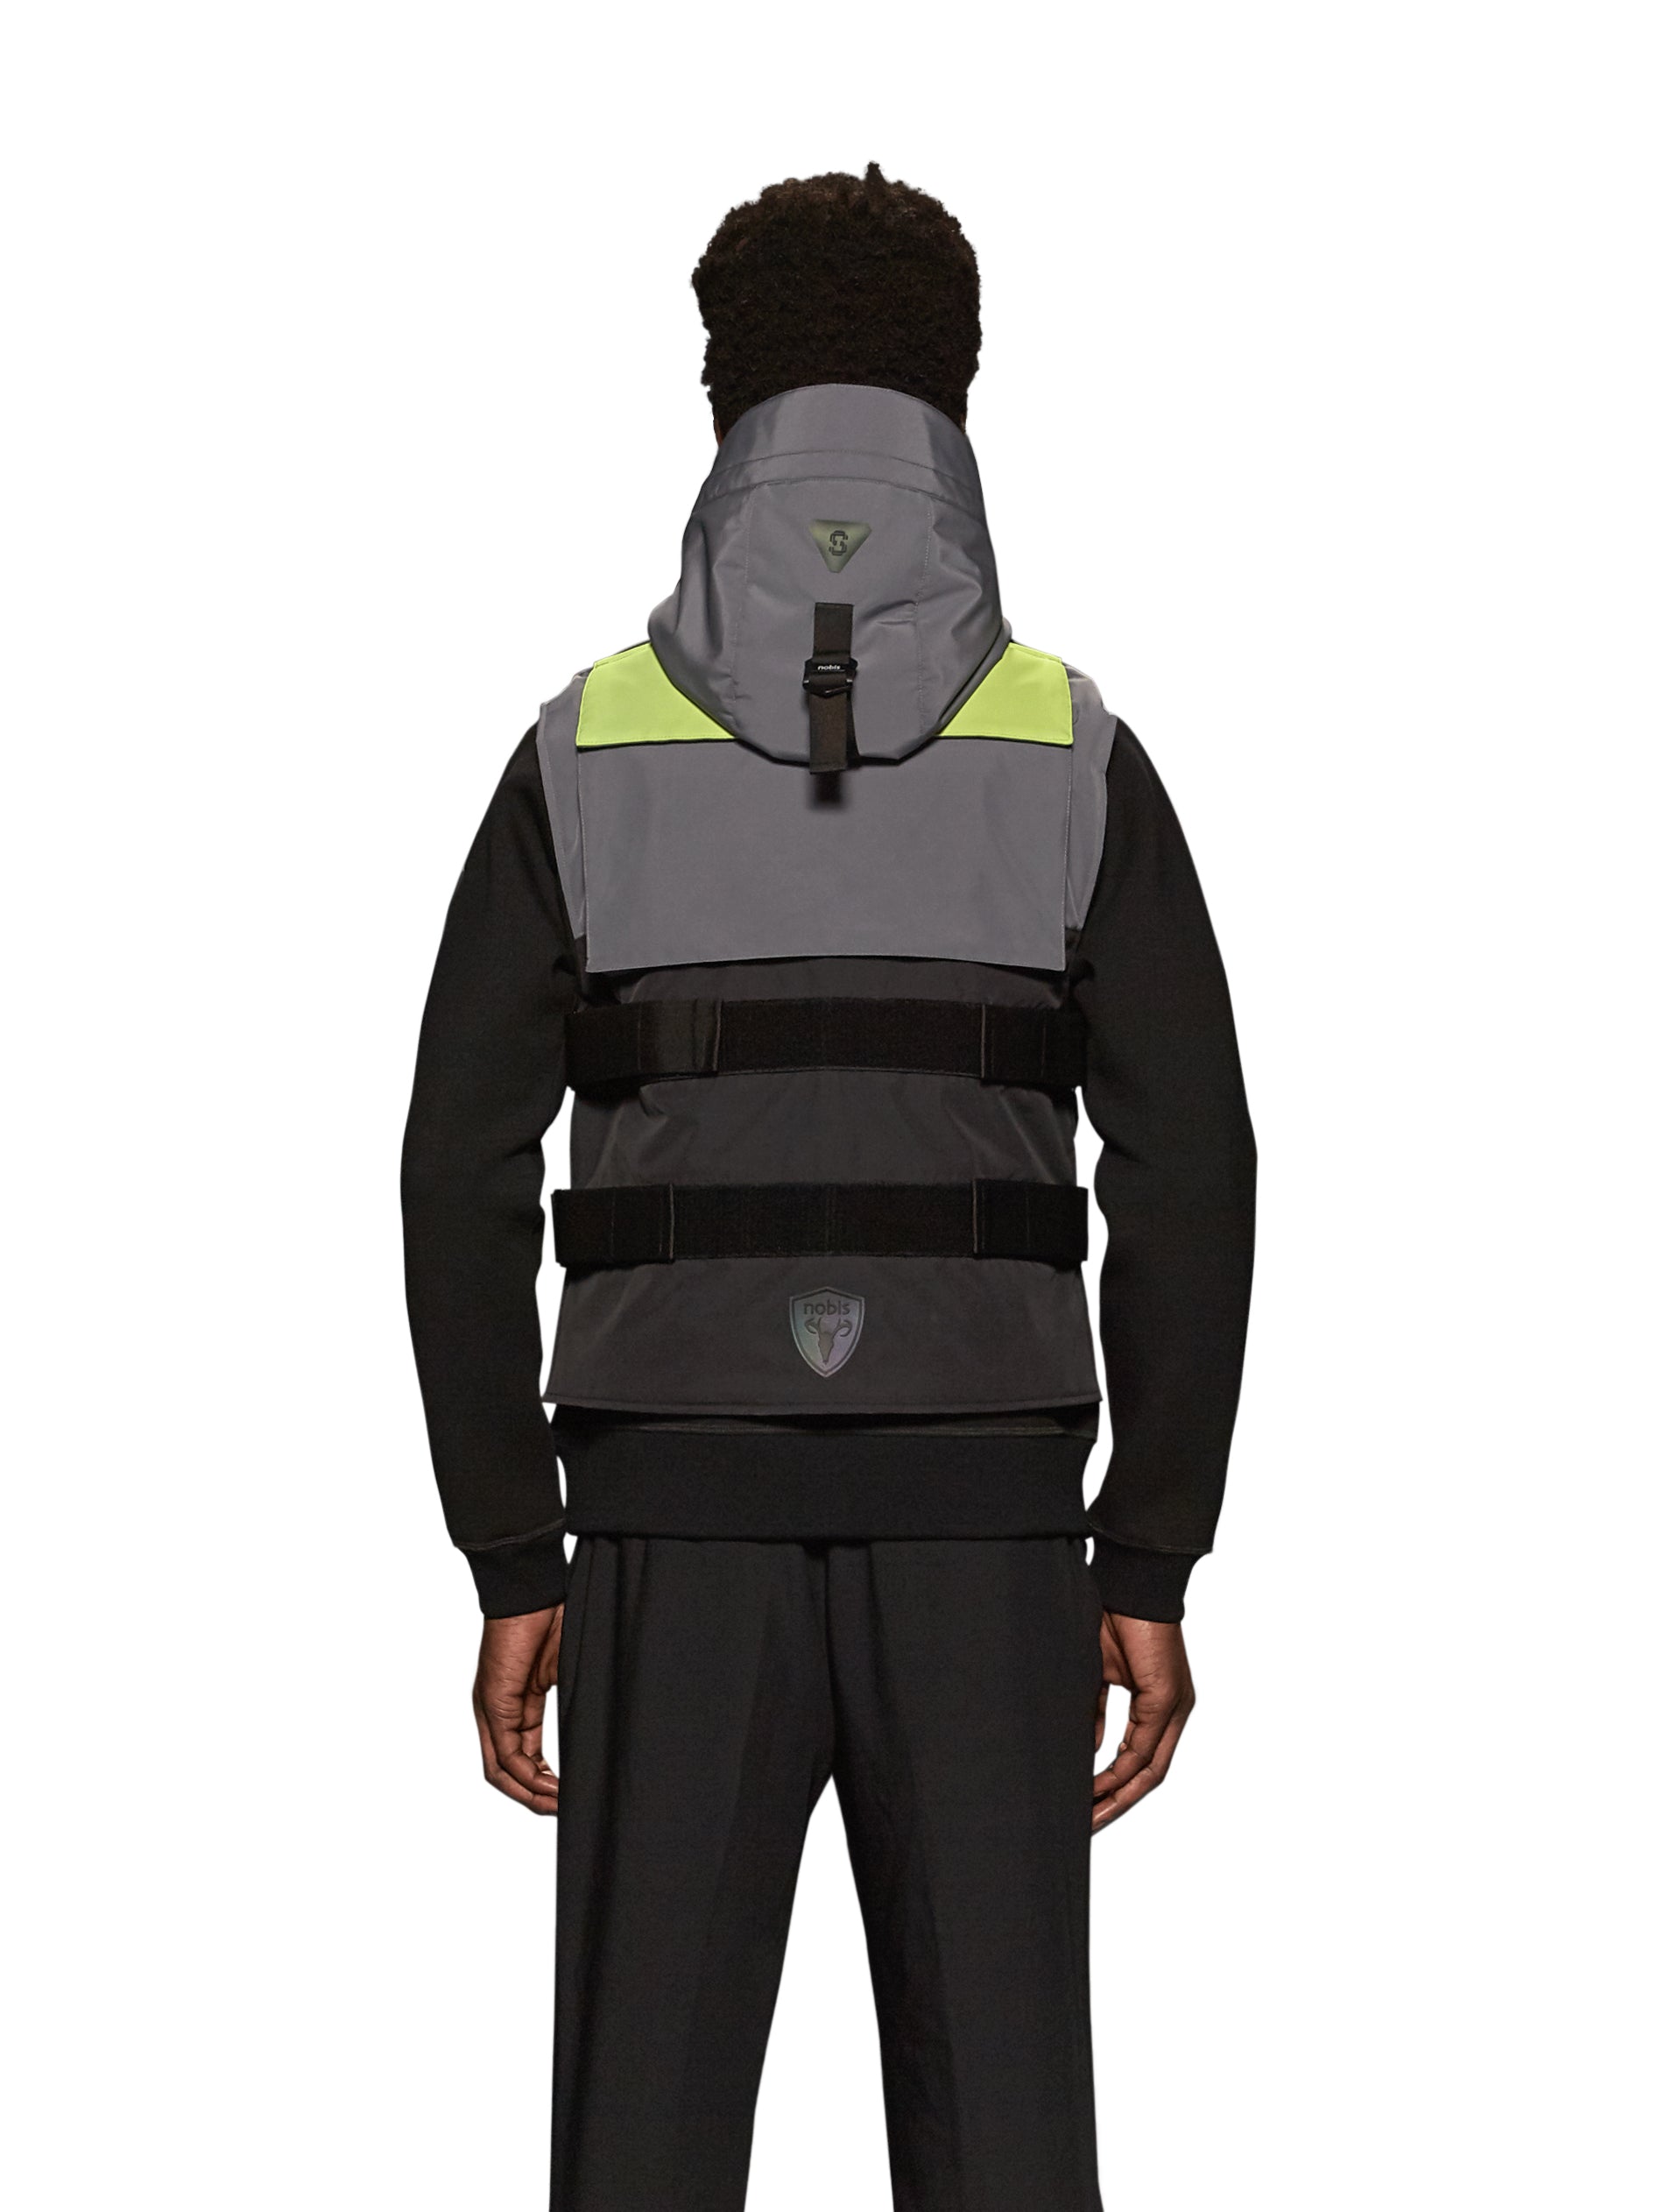 Unisex waist length hooded tactical vest with multiple exterior pockets on front and back, and adjustable side webbing fasteners, colour blocked in Concrete/Black